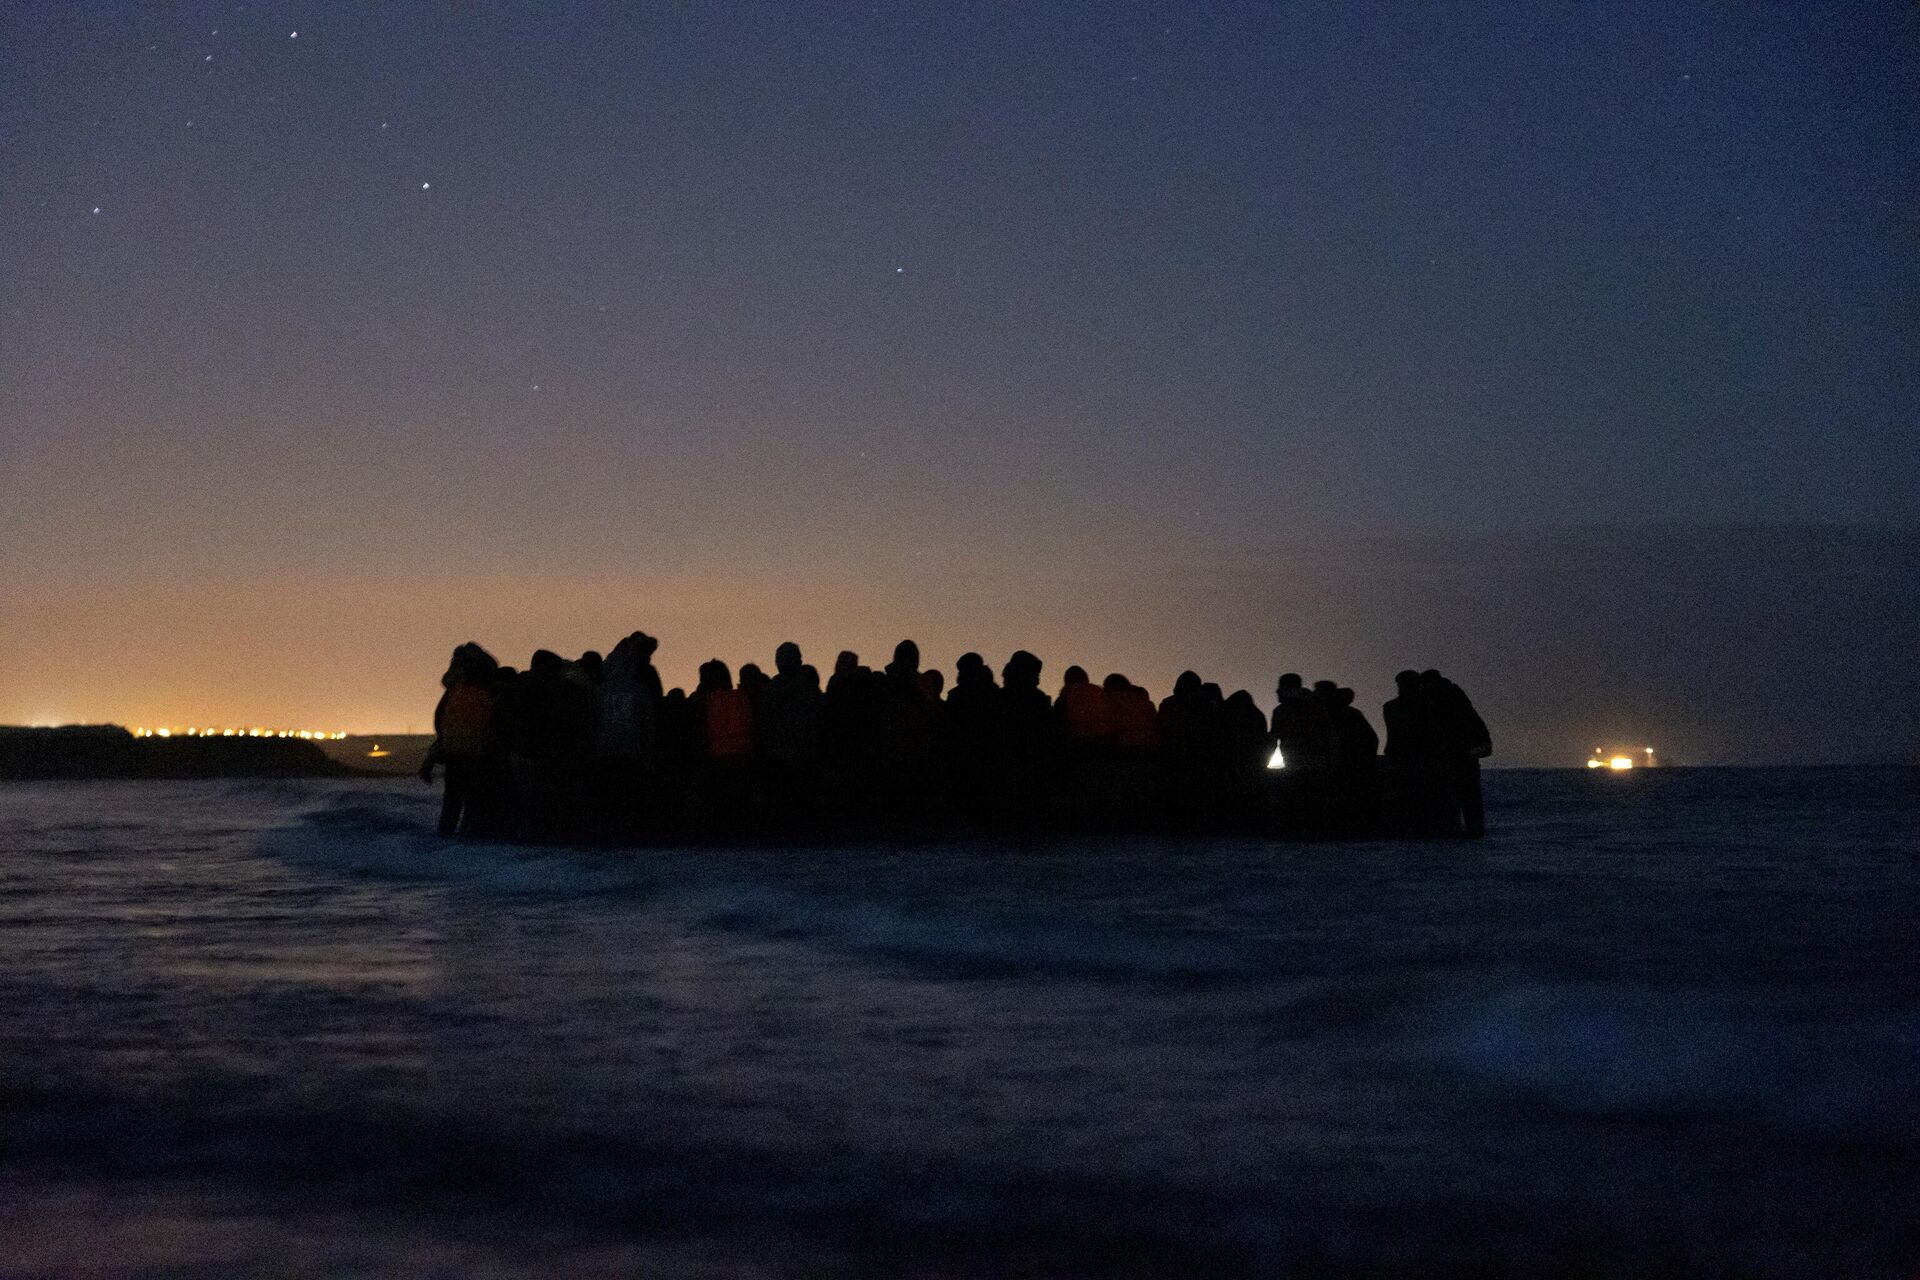 A group of 80 migrants get on one of the inflatable boats to cross the Channel towards England at night, near Wimereux, northern France, on October 16, 2021 - Sputnik International, 1920, 19.11.2021